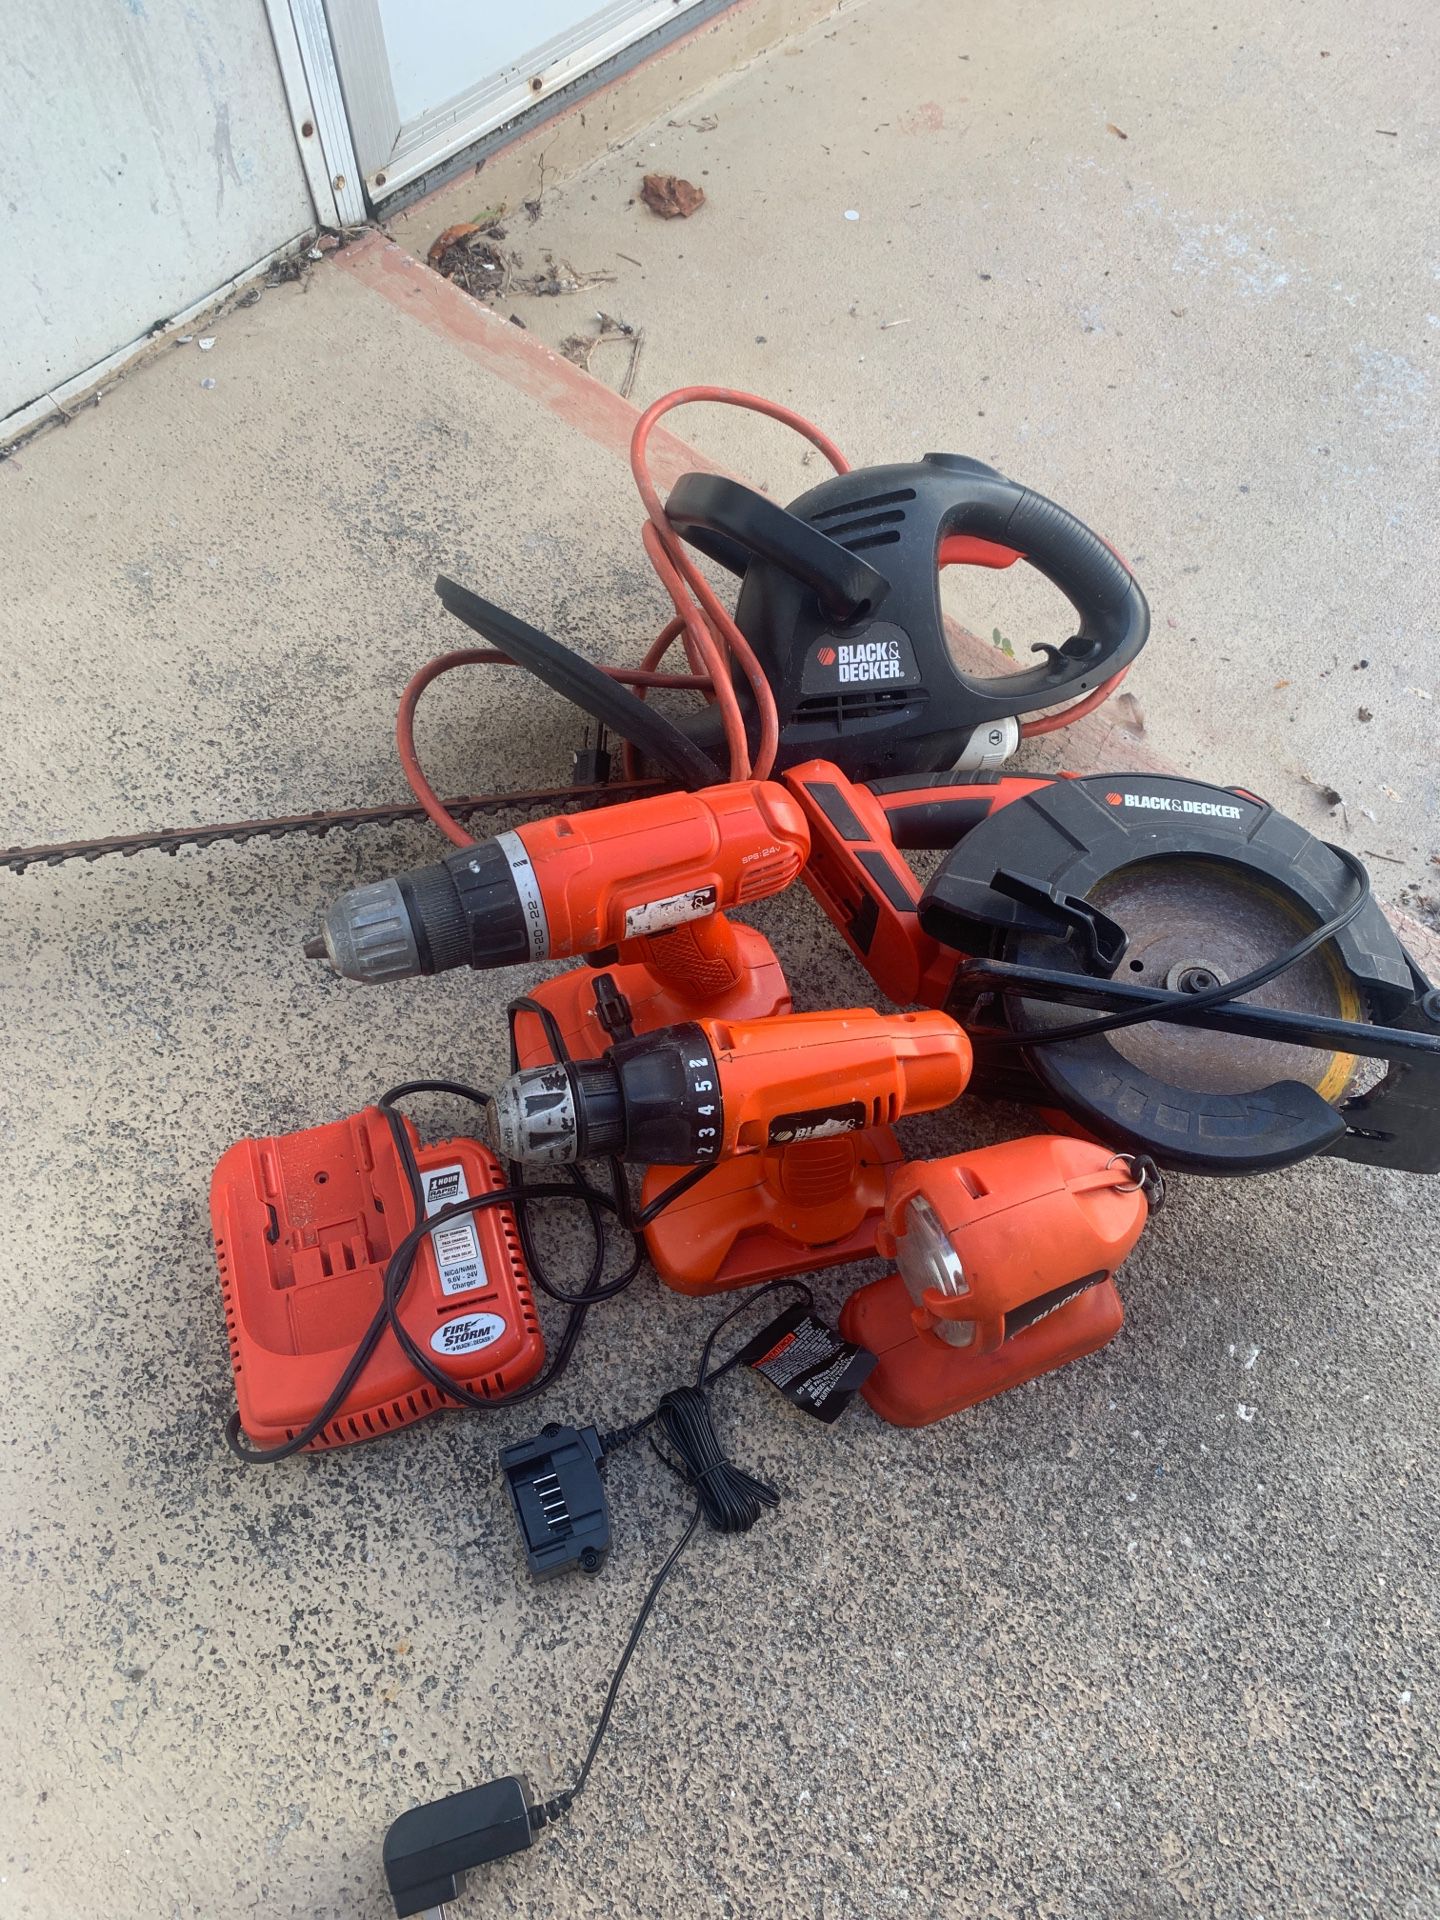 Lot of Black and Decker Power Tools